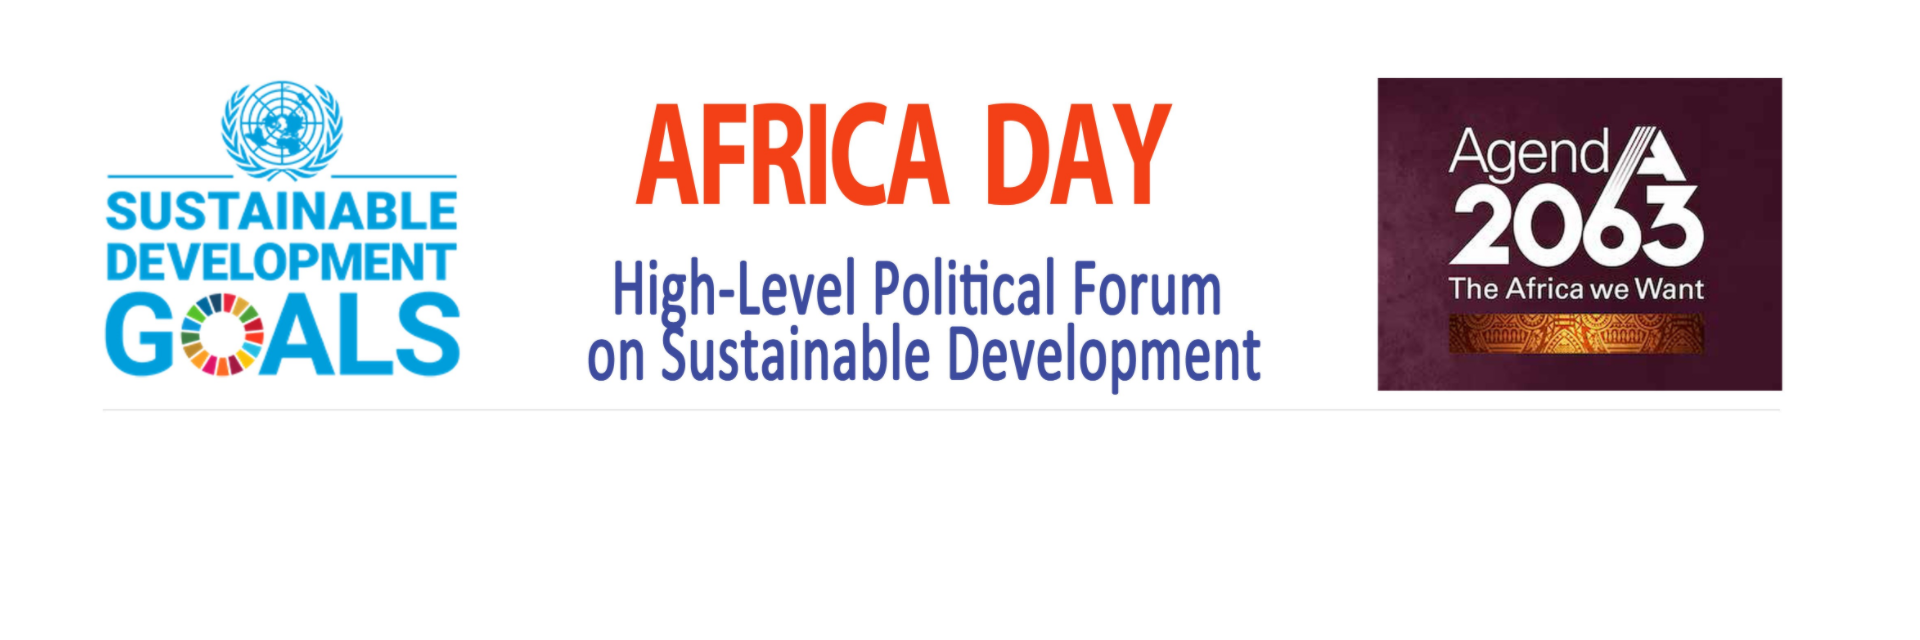 Africa Day at the High-Level Political Forum on Sustainable Development 2022